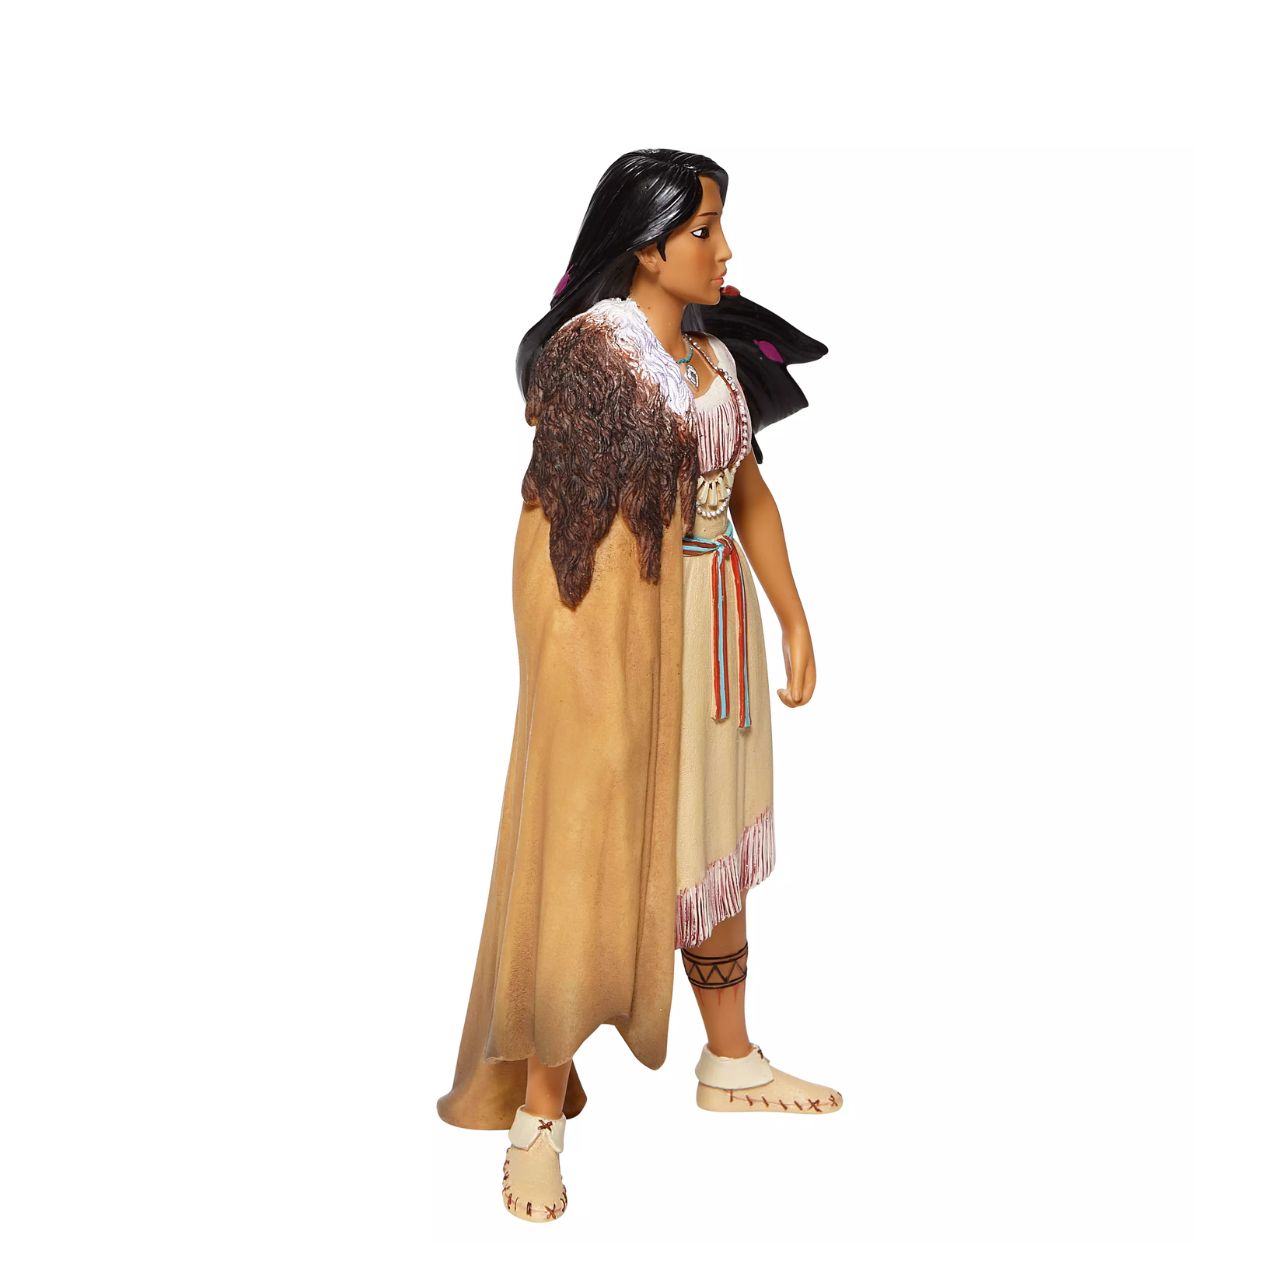 Pocahontas, daughter of Chief Powhatan of the Virginian native American tribe, strikes a powerful pose in this captivating Disney statuette. With colours in her hair and moccasins on her feet, she is a vision of beauty and female capability.